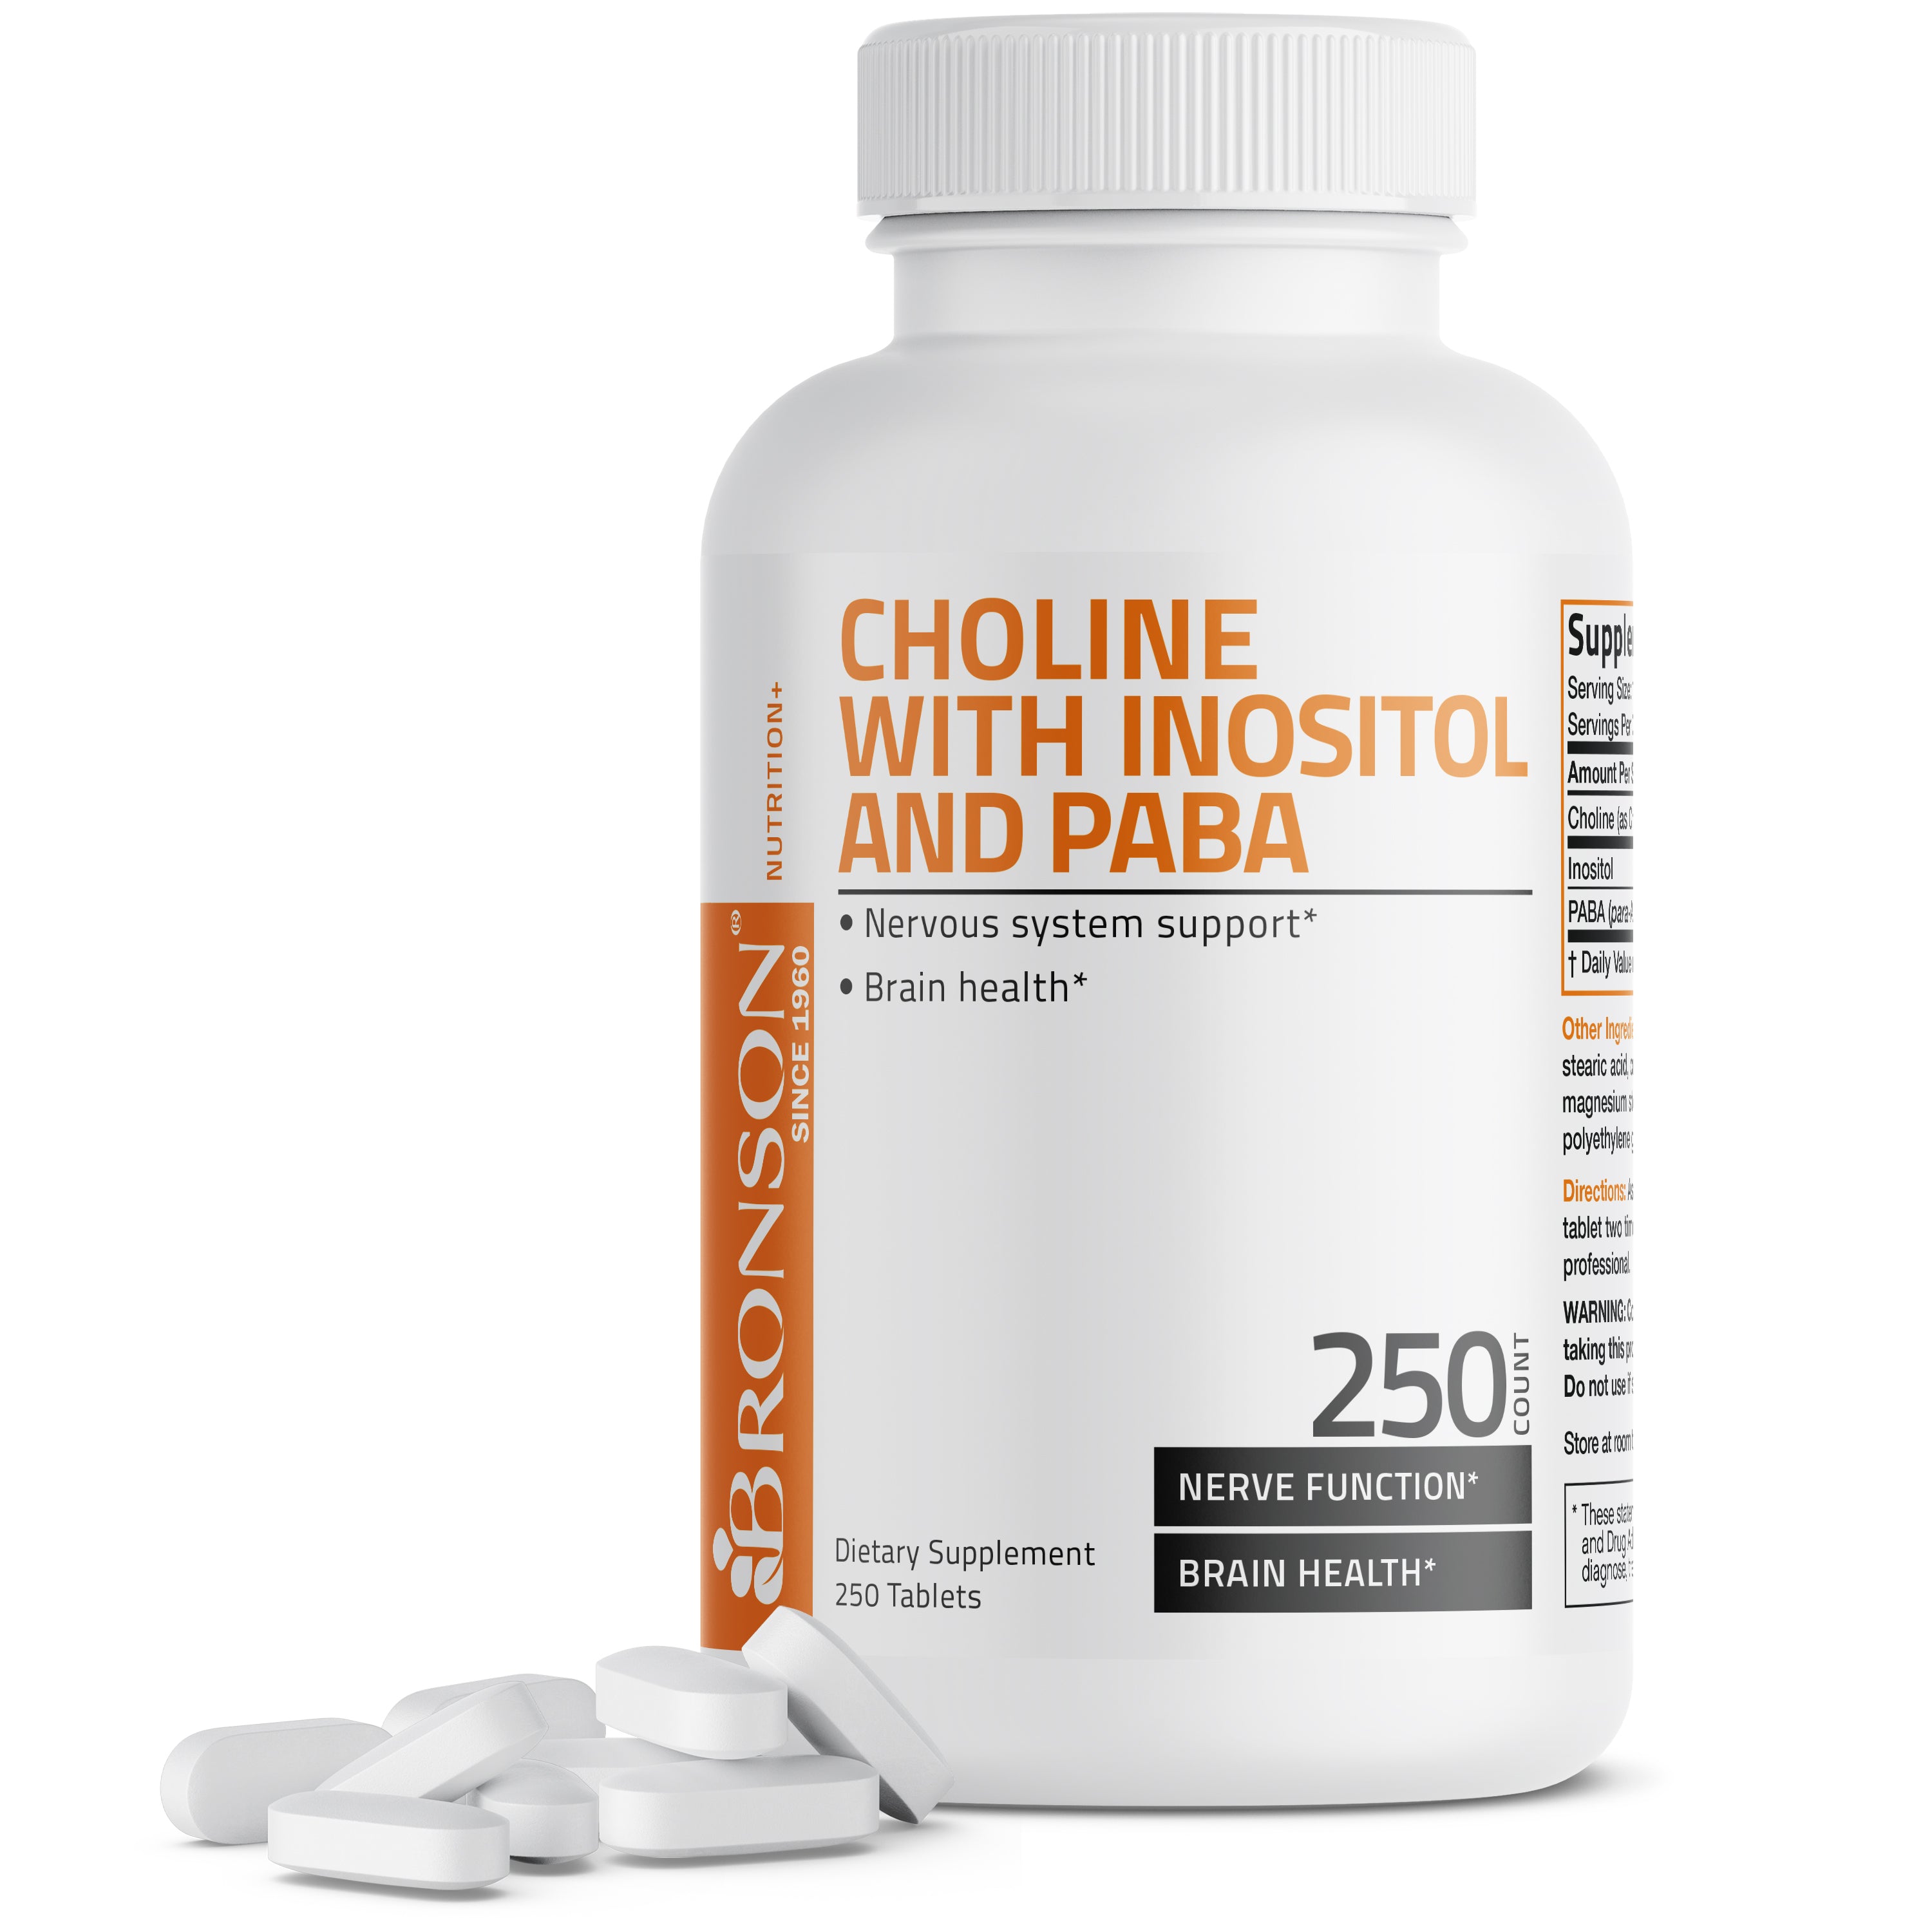 Choline with Inositol and Paba - 250 Tablets view 1 of 6